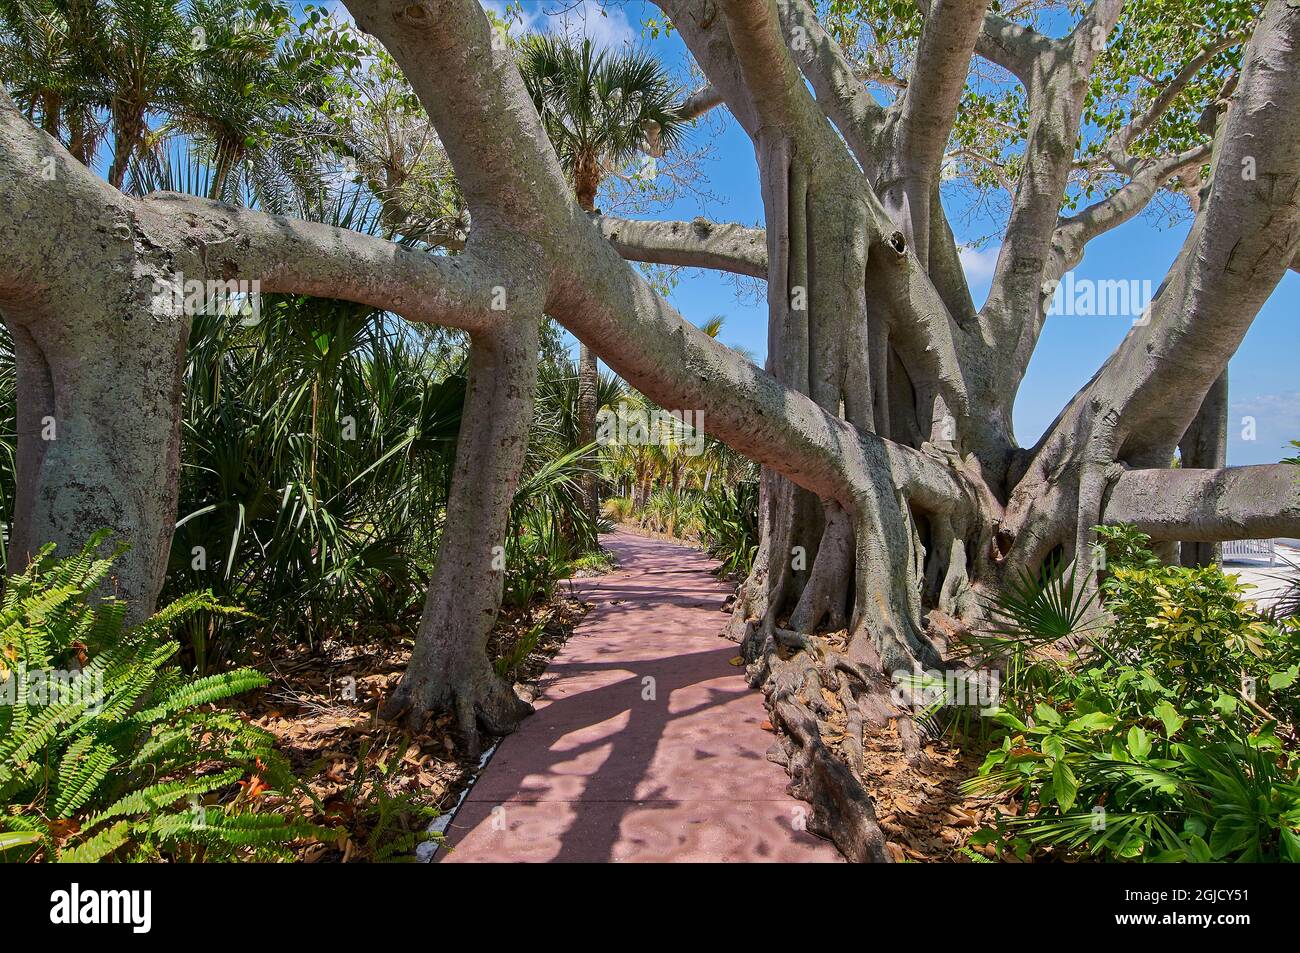 USA, Florida, Useppa Island. It was added to the U.S. Register of Historic Places in 1996. Stock Photo